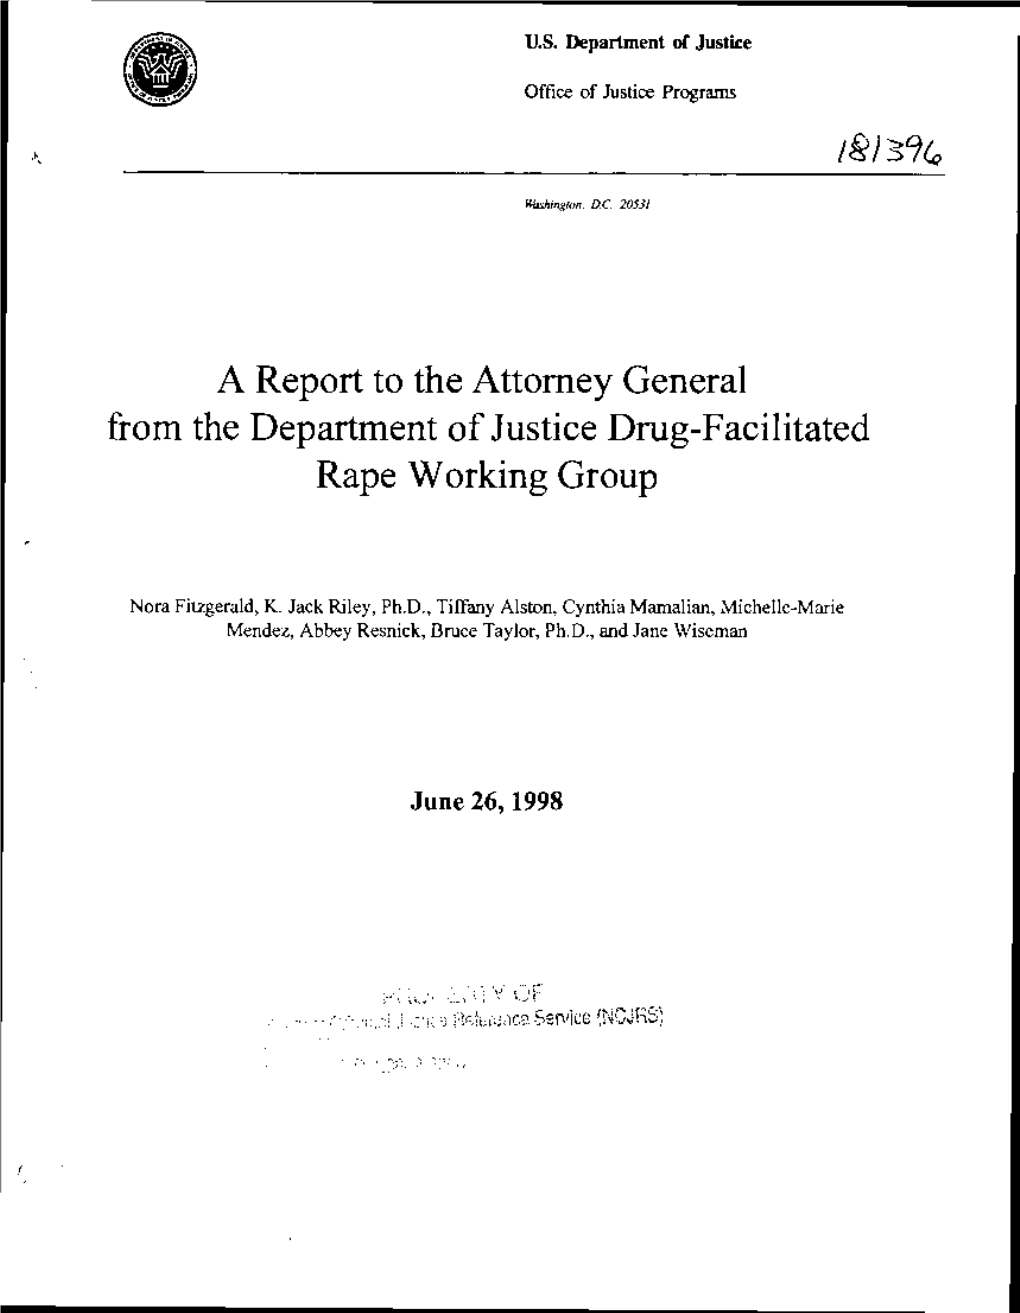 A Report to the Attorney General from the Department of Justice Drug-Facilitated Rape Working Group